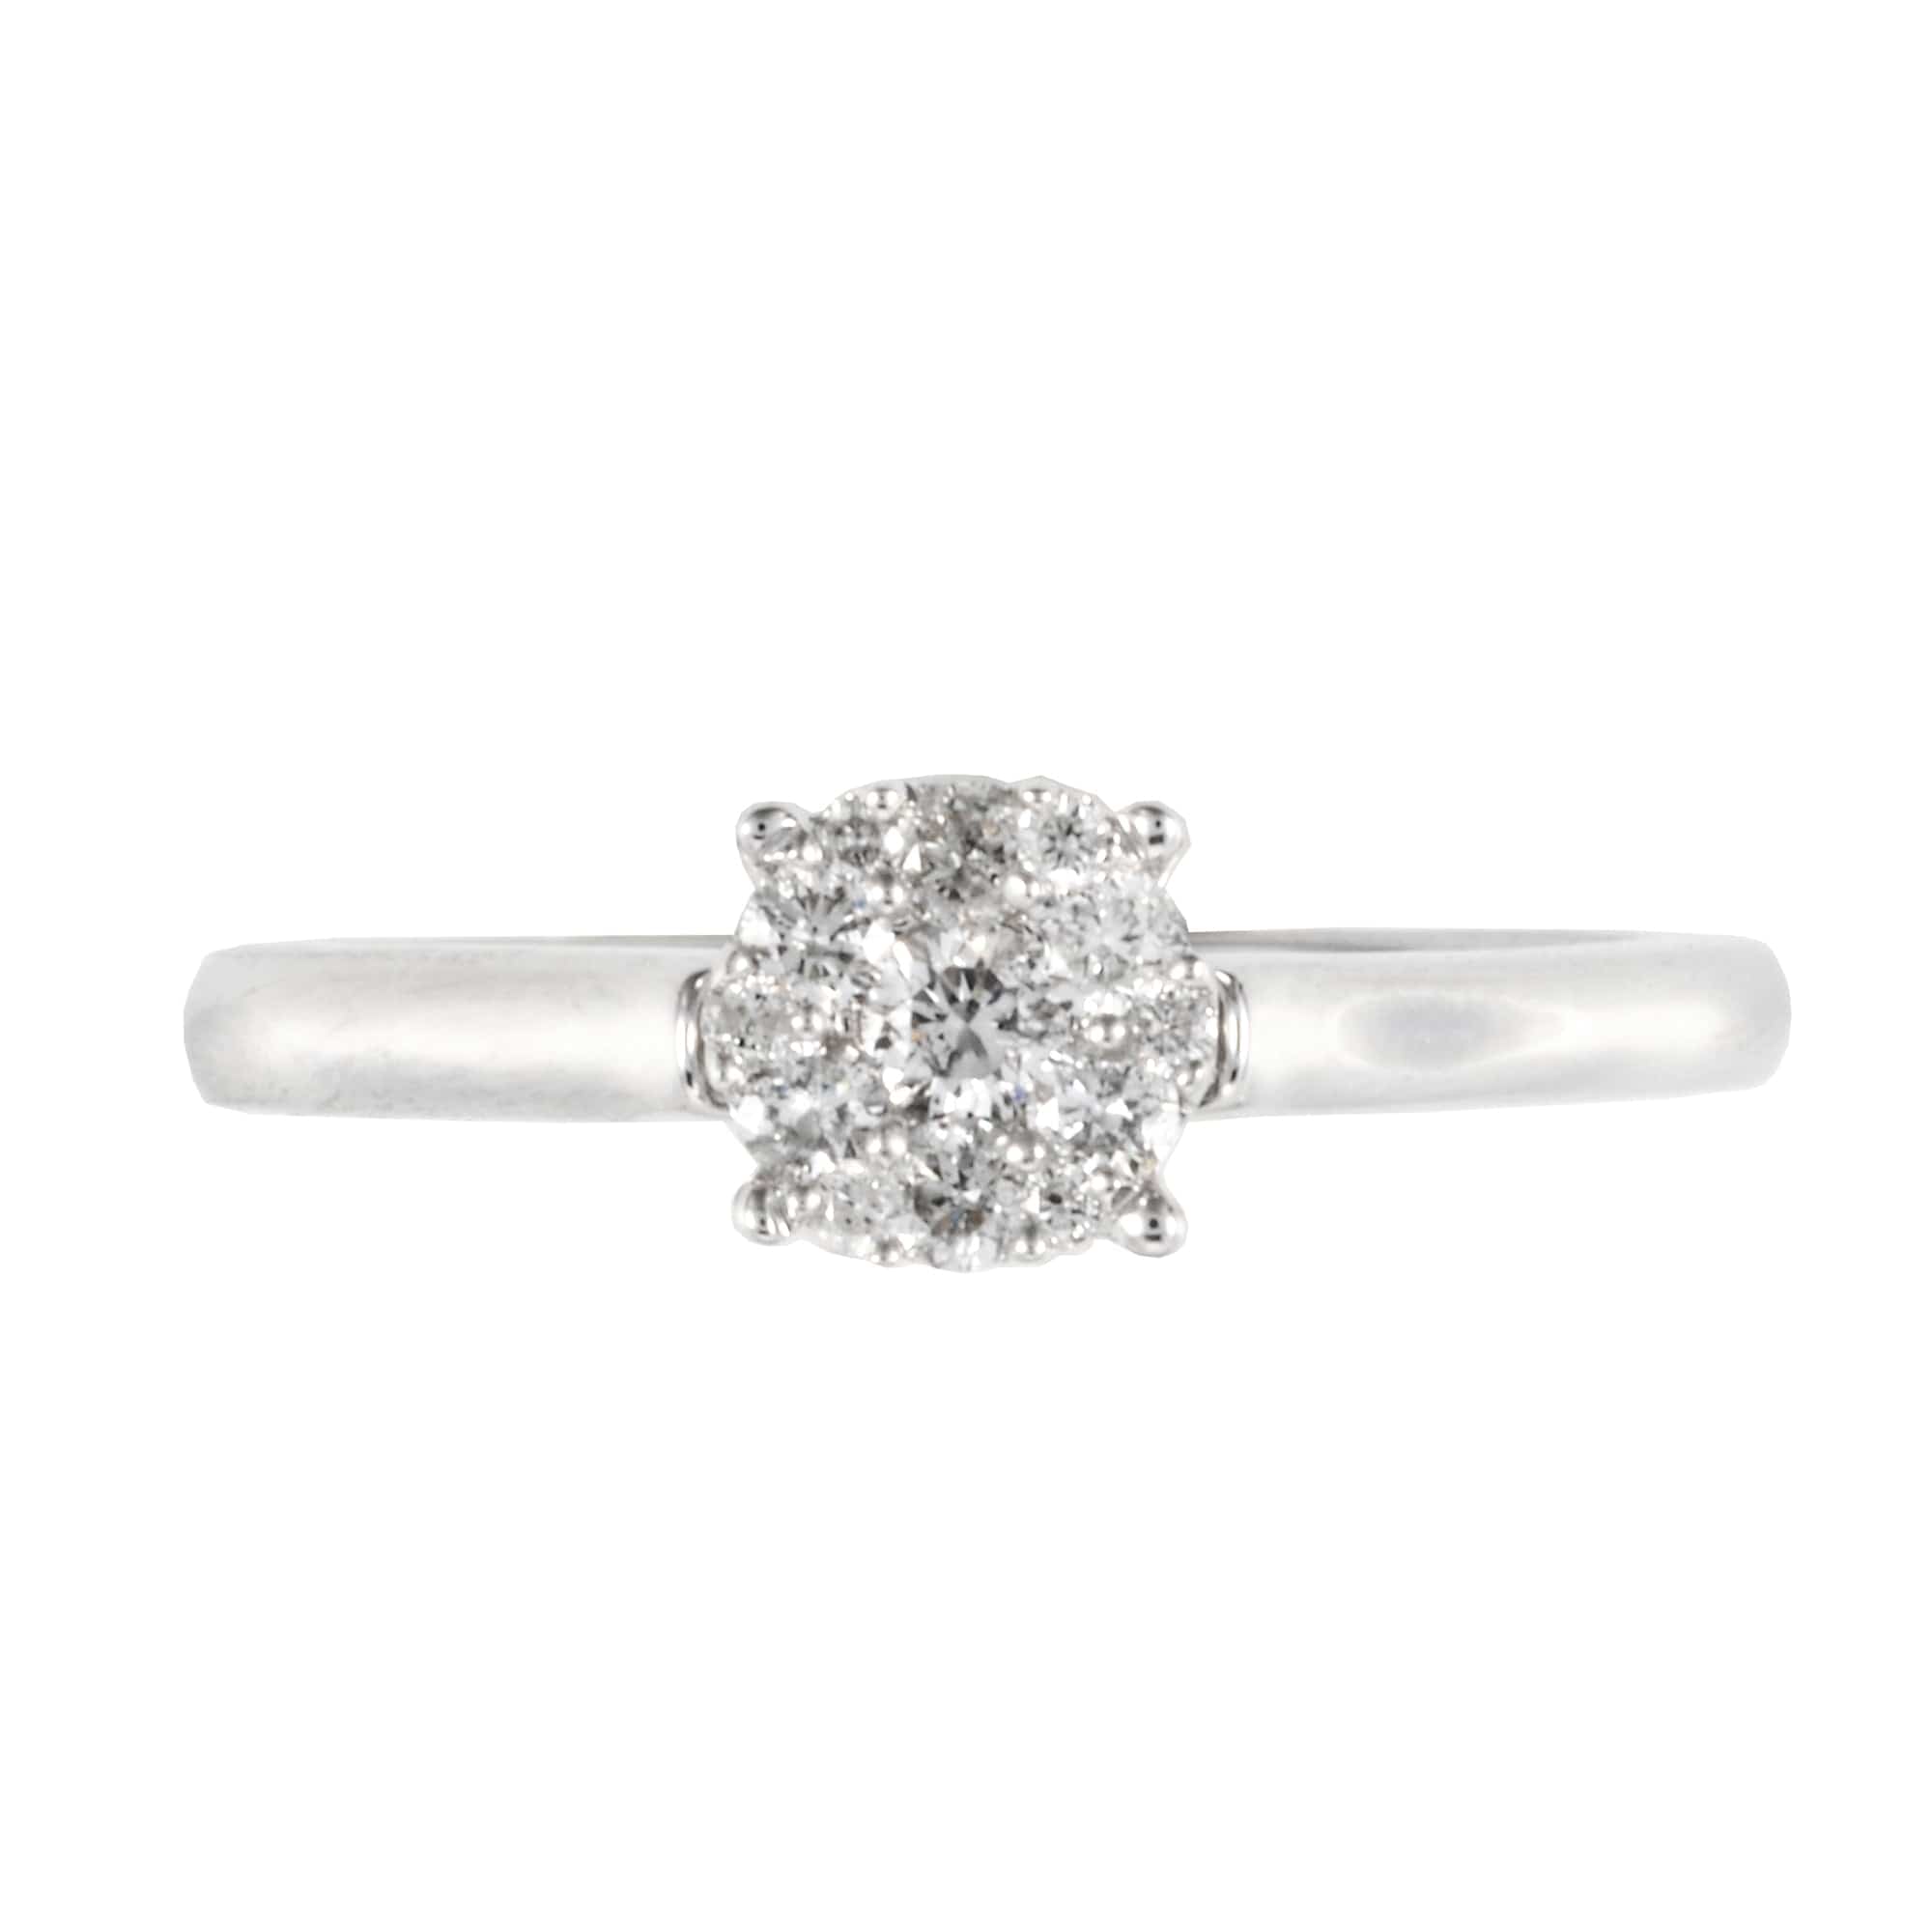 RG030218A Classic Round Diamond Solitaire Ring in 18ct White Gold 2